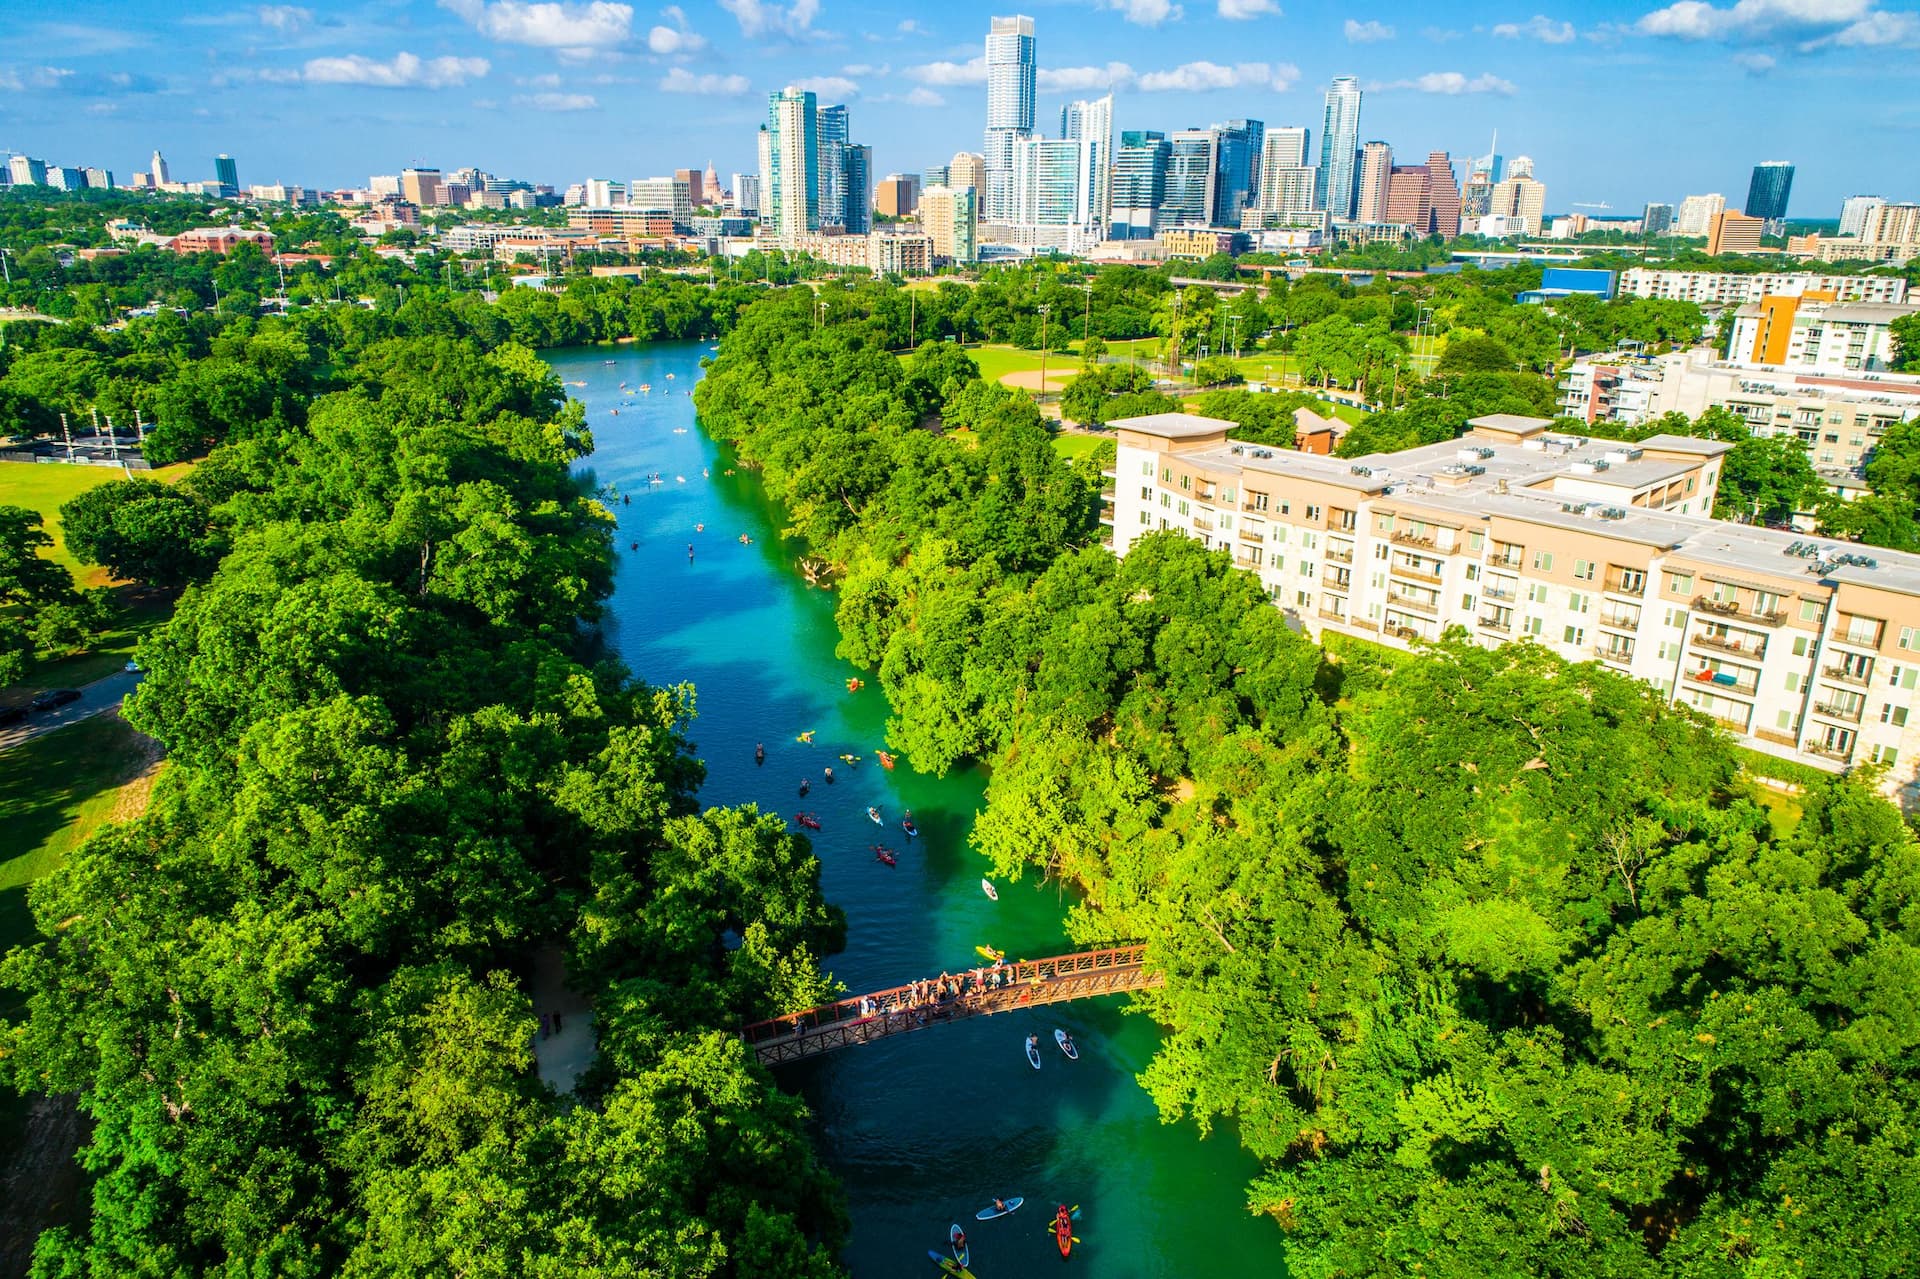 Austin Texas skyline cityscape aerial drone view above green landscape Barton creek flowing into town lake